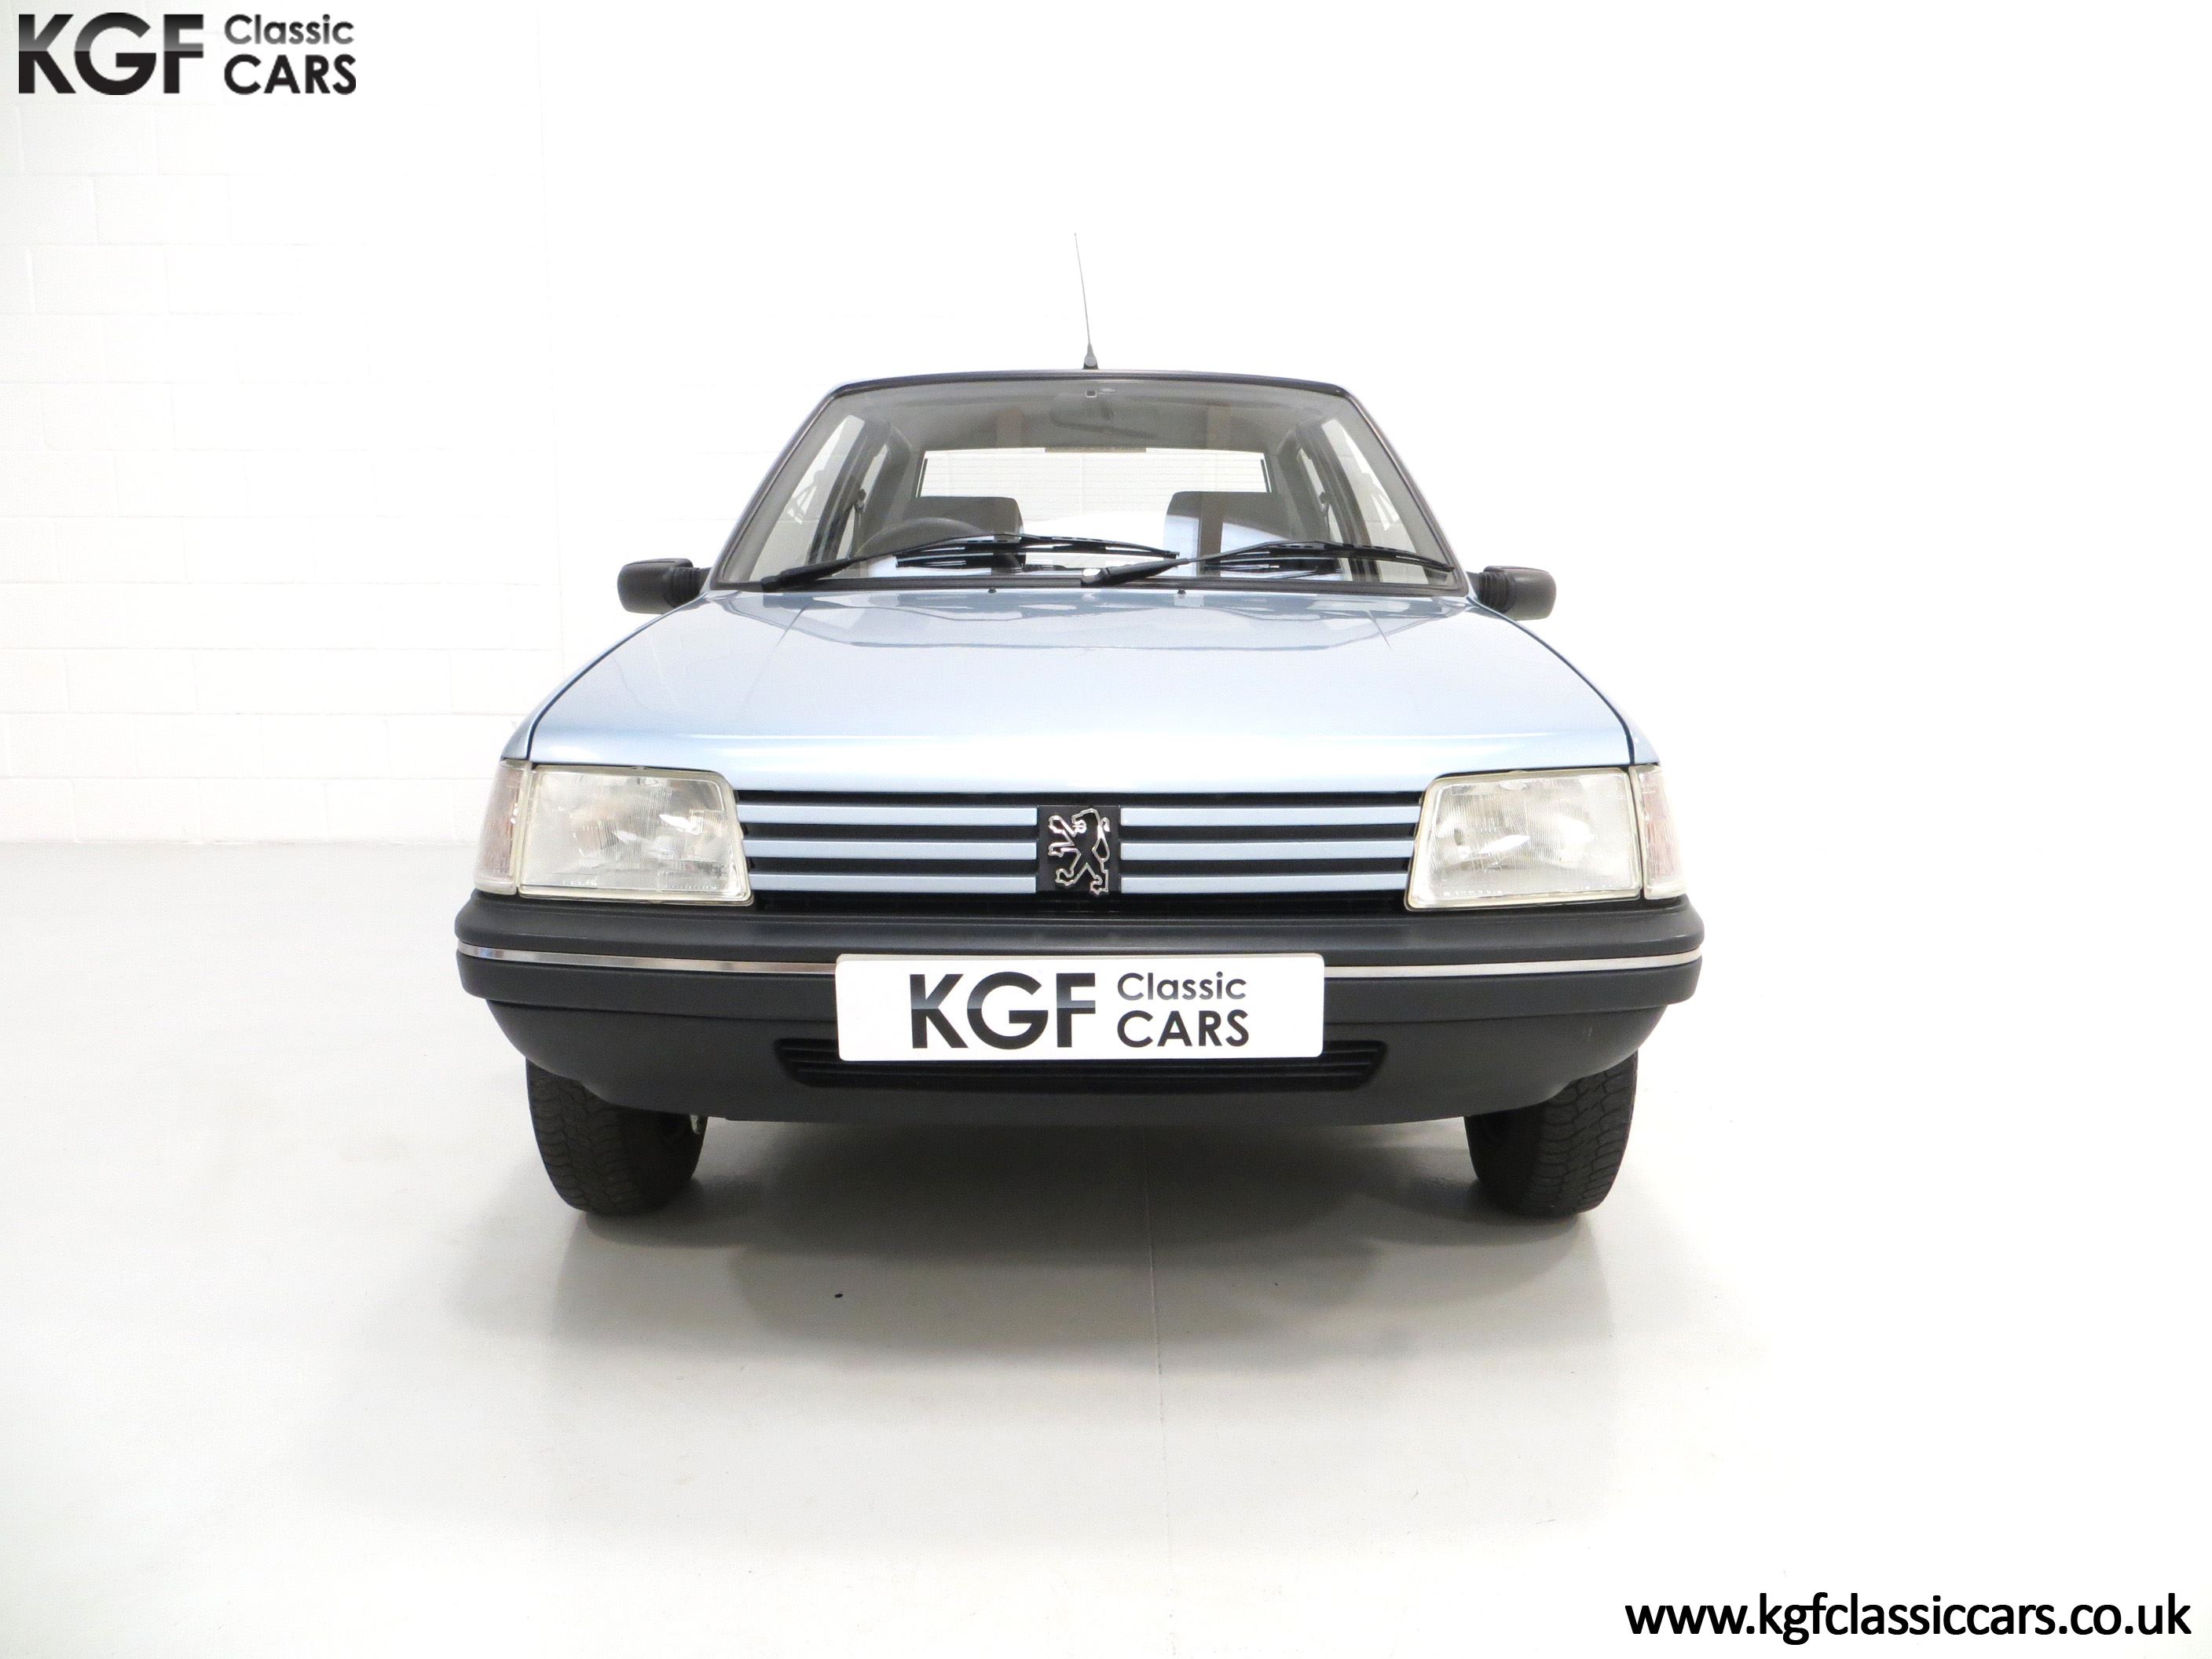 Peugeot 205  0ruop bpb0g9obfmixv9